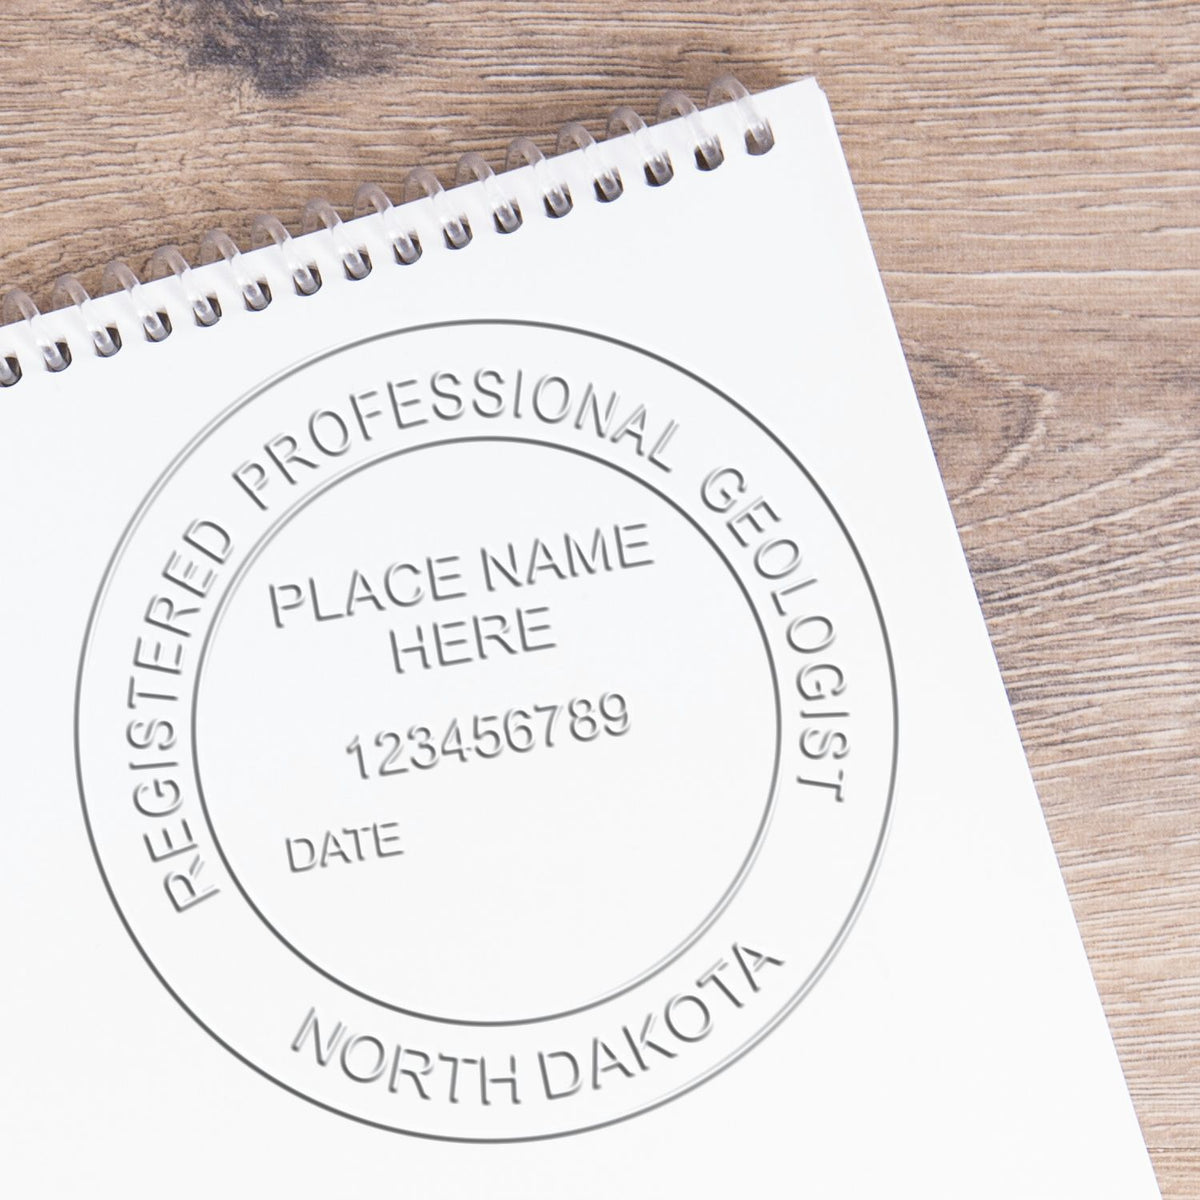 This paper is stamped with a sample imprint of the Long Reach North Dakota Geology Seal, signifying its quality and reliability.